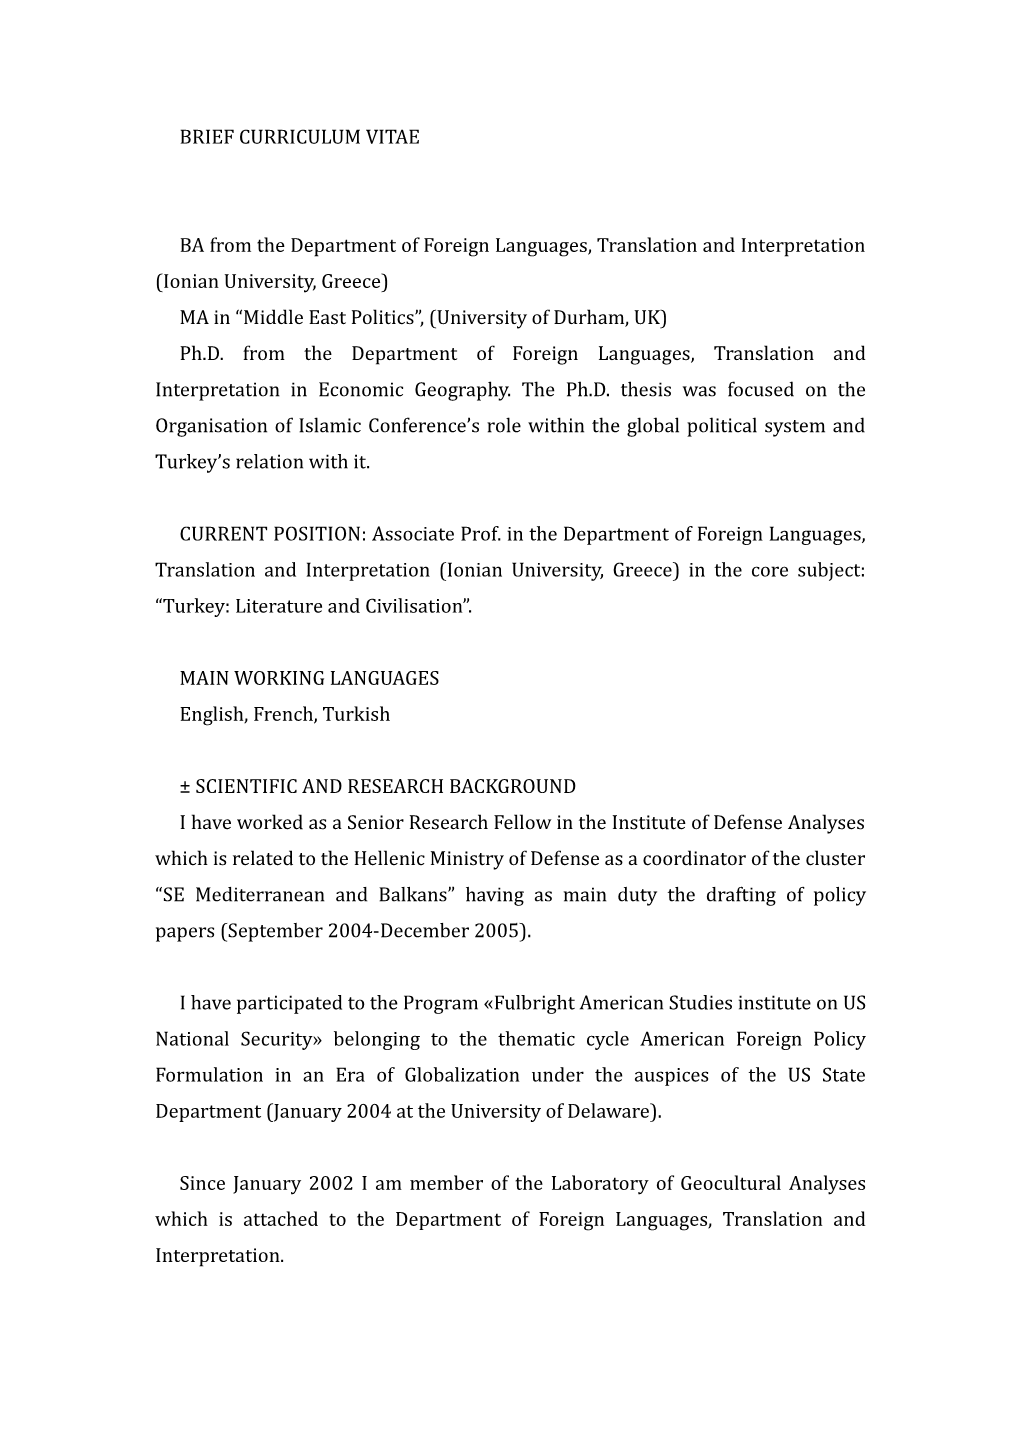 BA from the Department of Foreign Languages, Translation and Interpretation (Ionian University